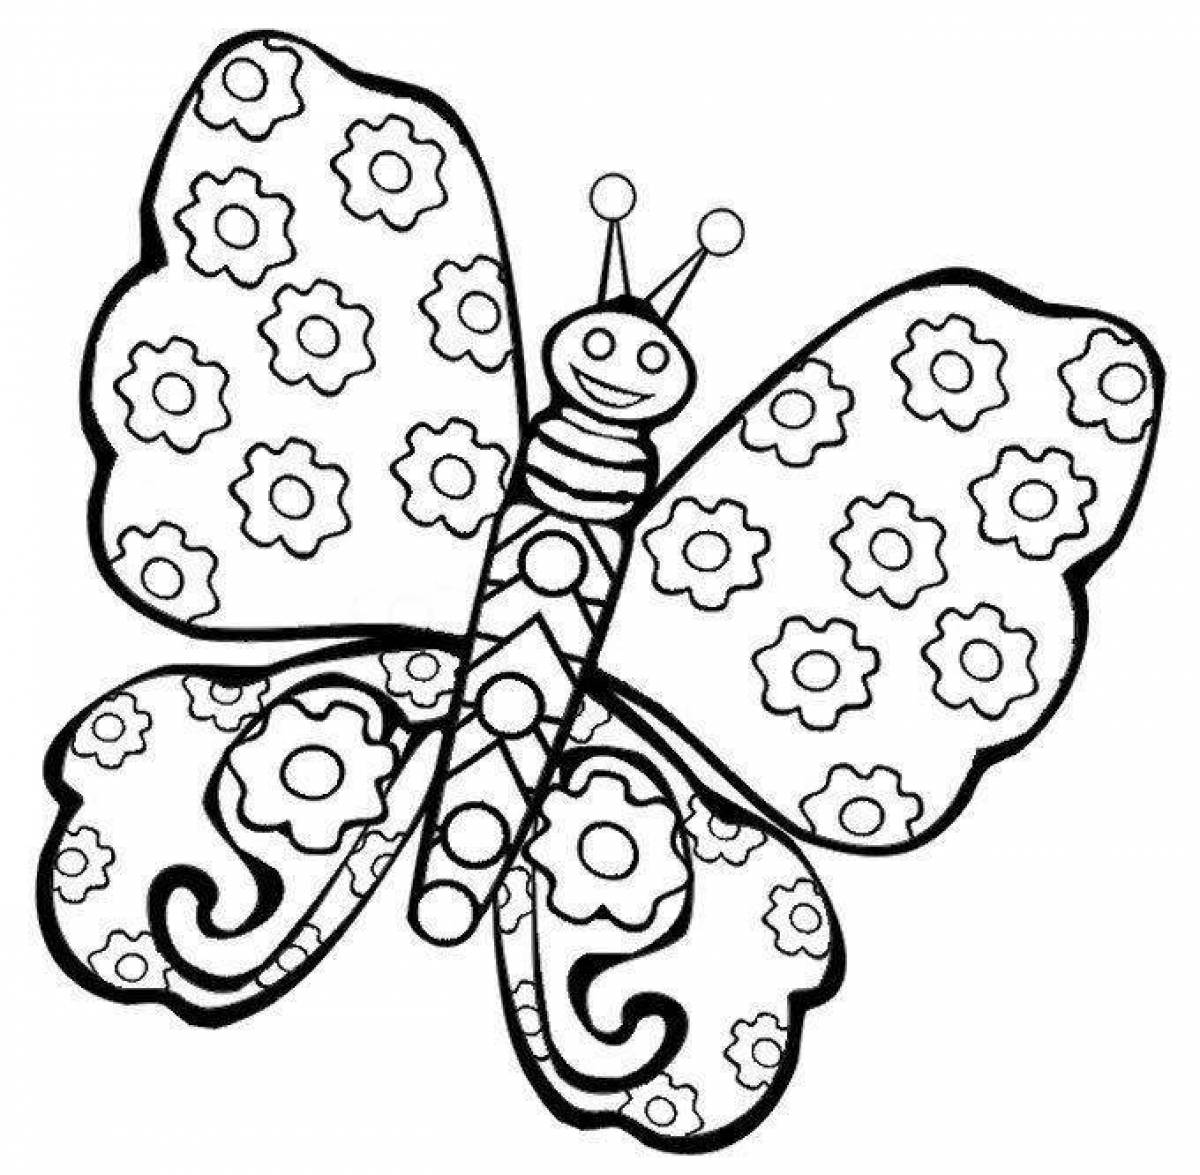 Big butterfly coloring book for children 6-7 years old